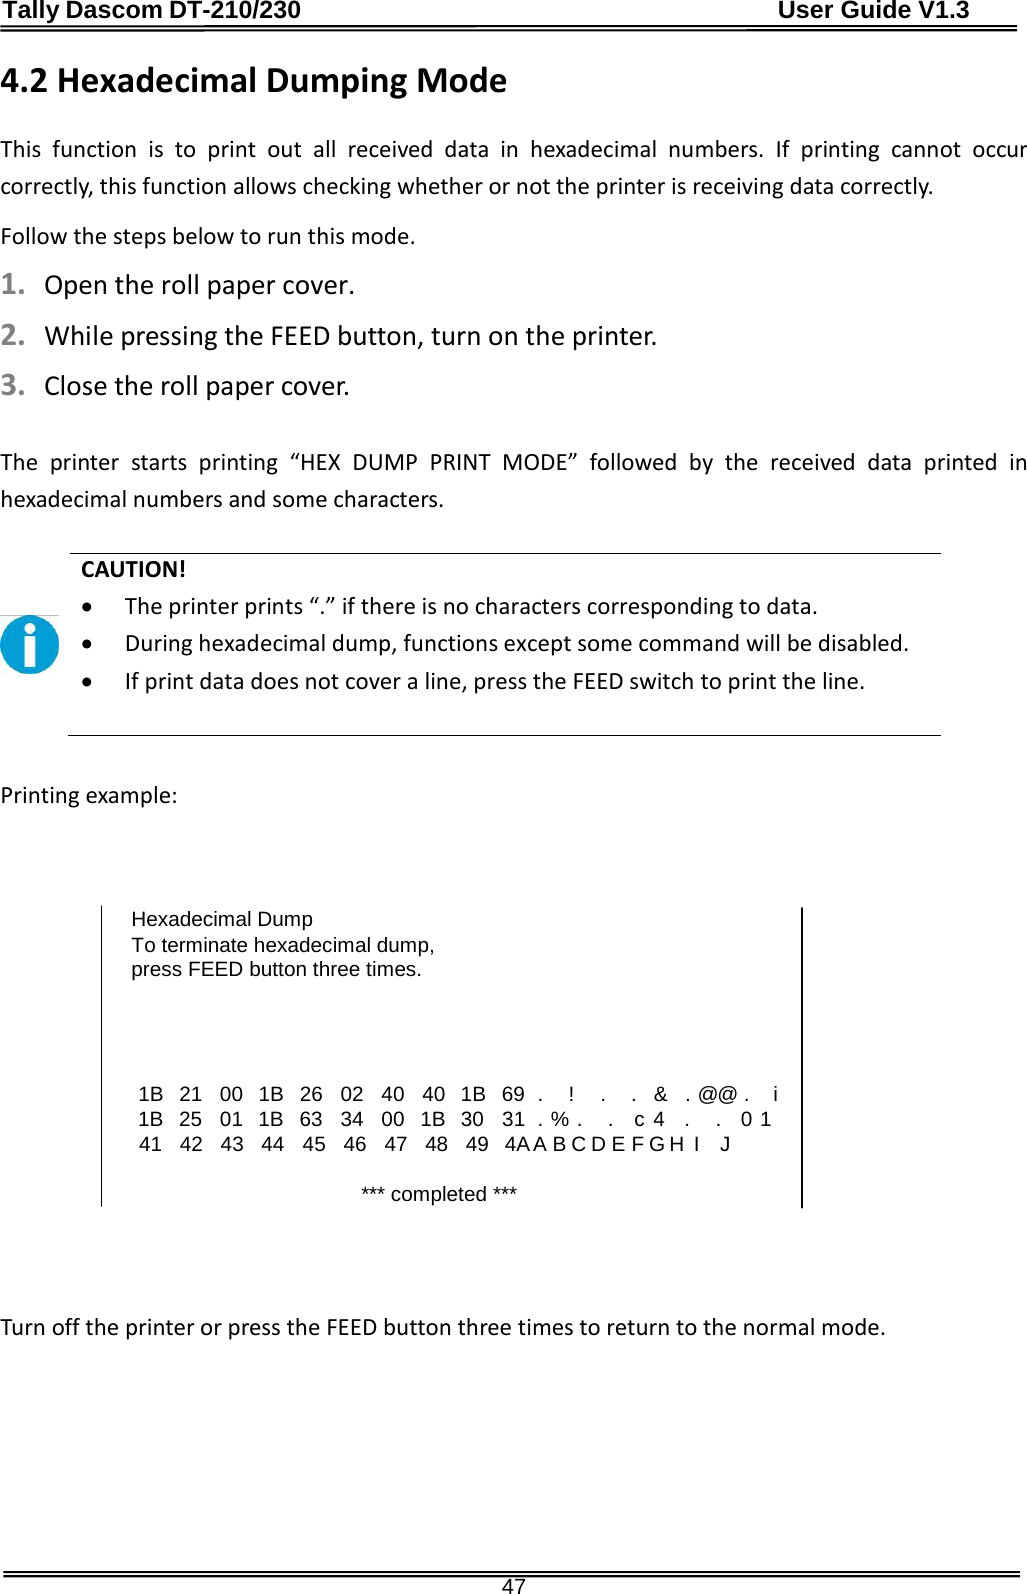 Tally Dascom DT-210/230                                      User Guide V1.3  47 4.2 Hexadecimal Dumping Mode  This  function is to print out all received data in hexadecimal numbers. If printing cannot occur correctly, this function allows checking whether or not the printer is receiving data correctly. Follow the steps below to run this mode. 1. Open the roll paper cover. 2. While pressing the FEED button, turn on the printer. 3. Close the roll paper cover.  The printer starts printing  “HEX DUMP PRINT MODE”  followed by the received data printed in hexadecimal numbers and some characters.   CAUTION! • The printer prints “.” if there is no characters corresponding to data. • During hexadecimal dump, functions except some command will be disabled. • If print data does not cover a line, press the FEED switch to print the line.   Printing example:    Hexadecimal Dump To terminate hexadecimal dump, press FEED button three times.      1B   21   00   1B   26   02   40   40   1B   69 .   !   .   .   &amp;   . @@ .  i     1B   25   01   1B   63   34   00   1B   30   31  . % .   .    c 4   .   .    0 1     41   42   43   44   45   46   47   48   49   4A A B C D E F G H  I   J     *** completed ***     Turn off the printer or press the FEED button three times to return to the normal mode.         